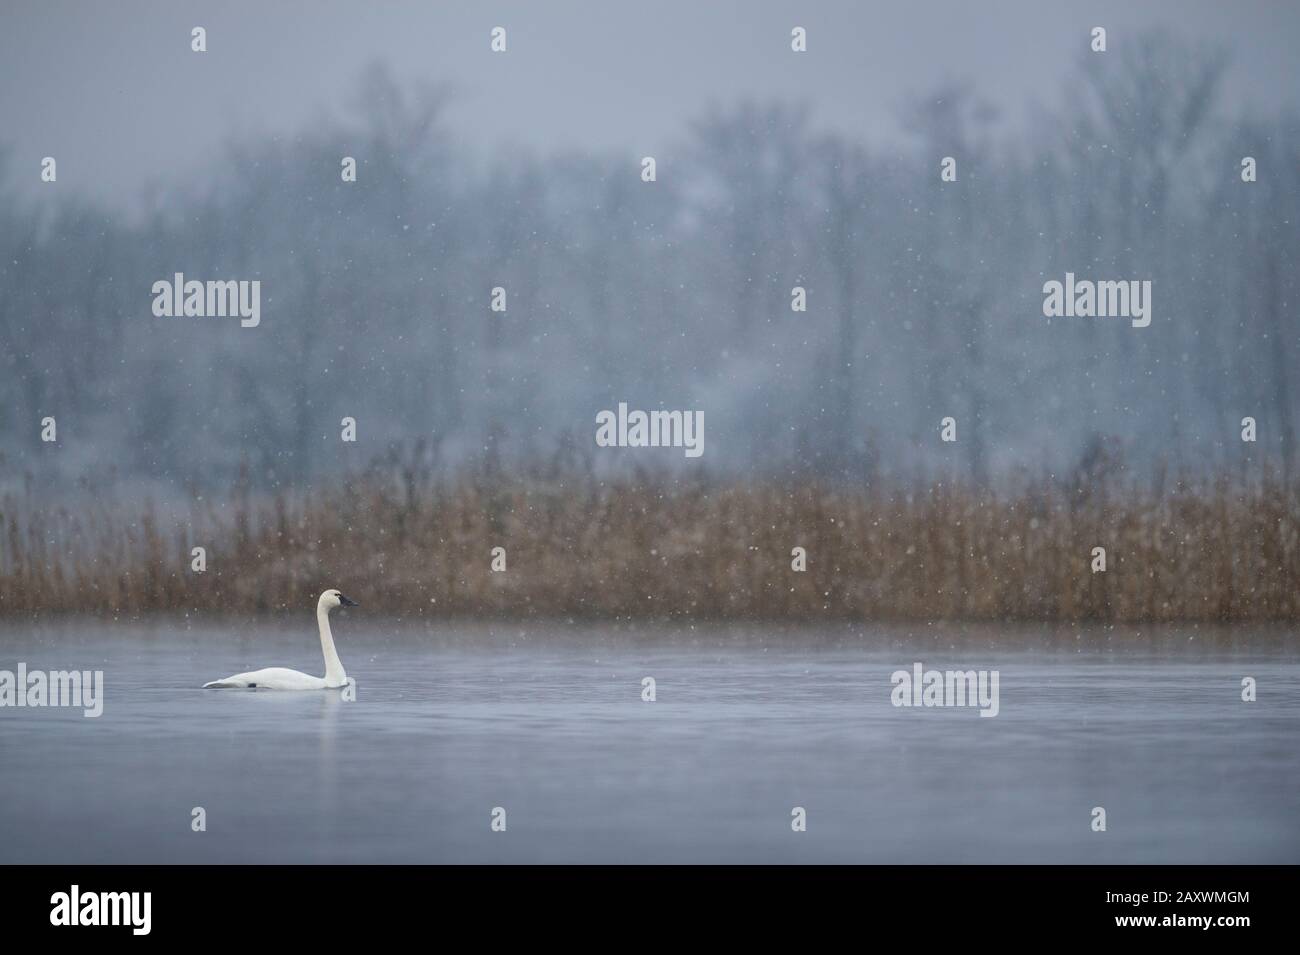 A Tundra Swan swims on the calm water in a light falling snow on a cold winter morning. Stock Photo